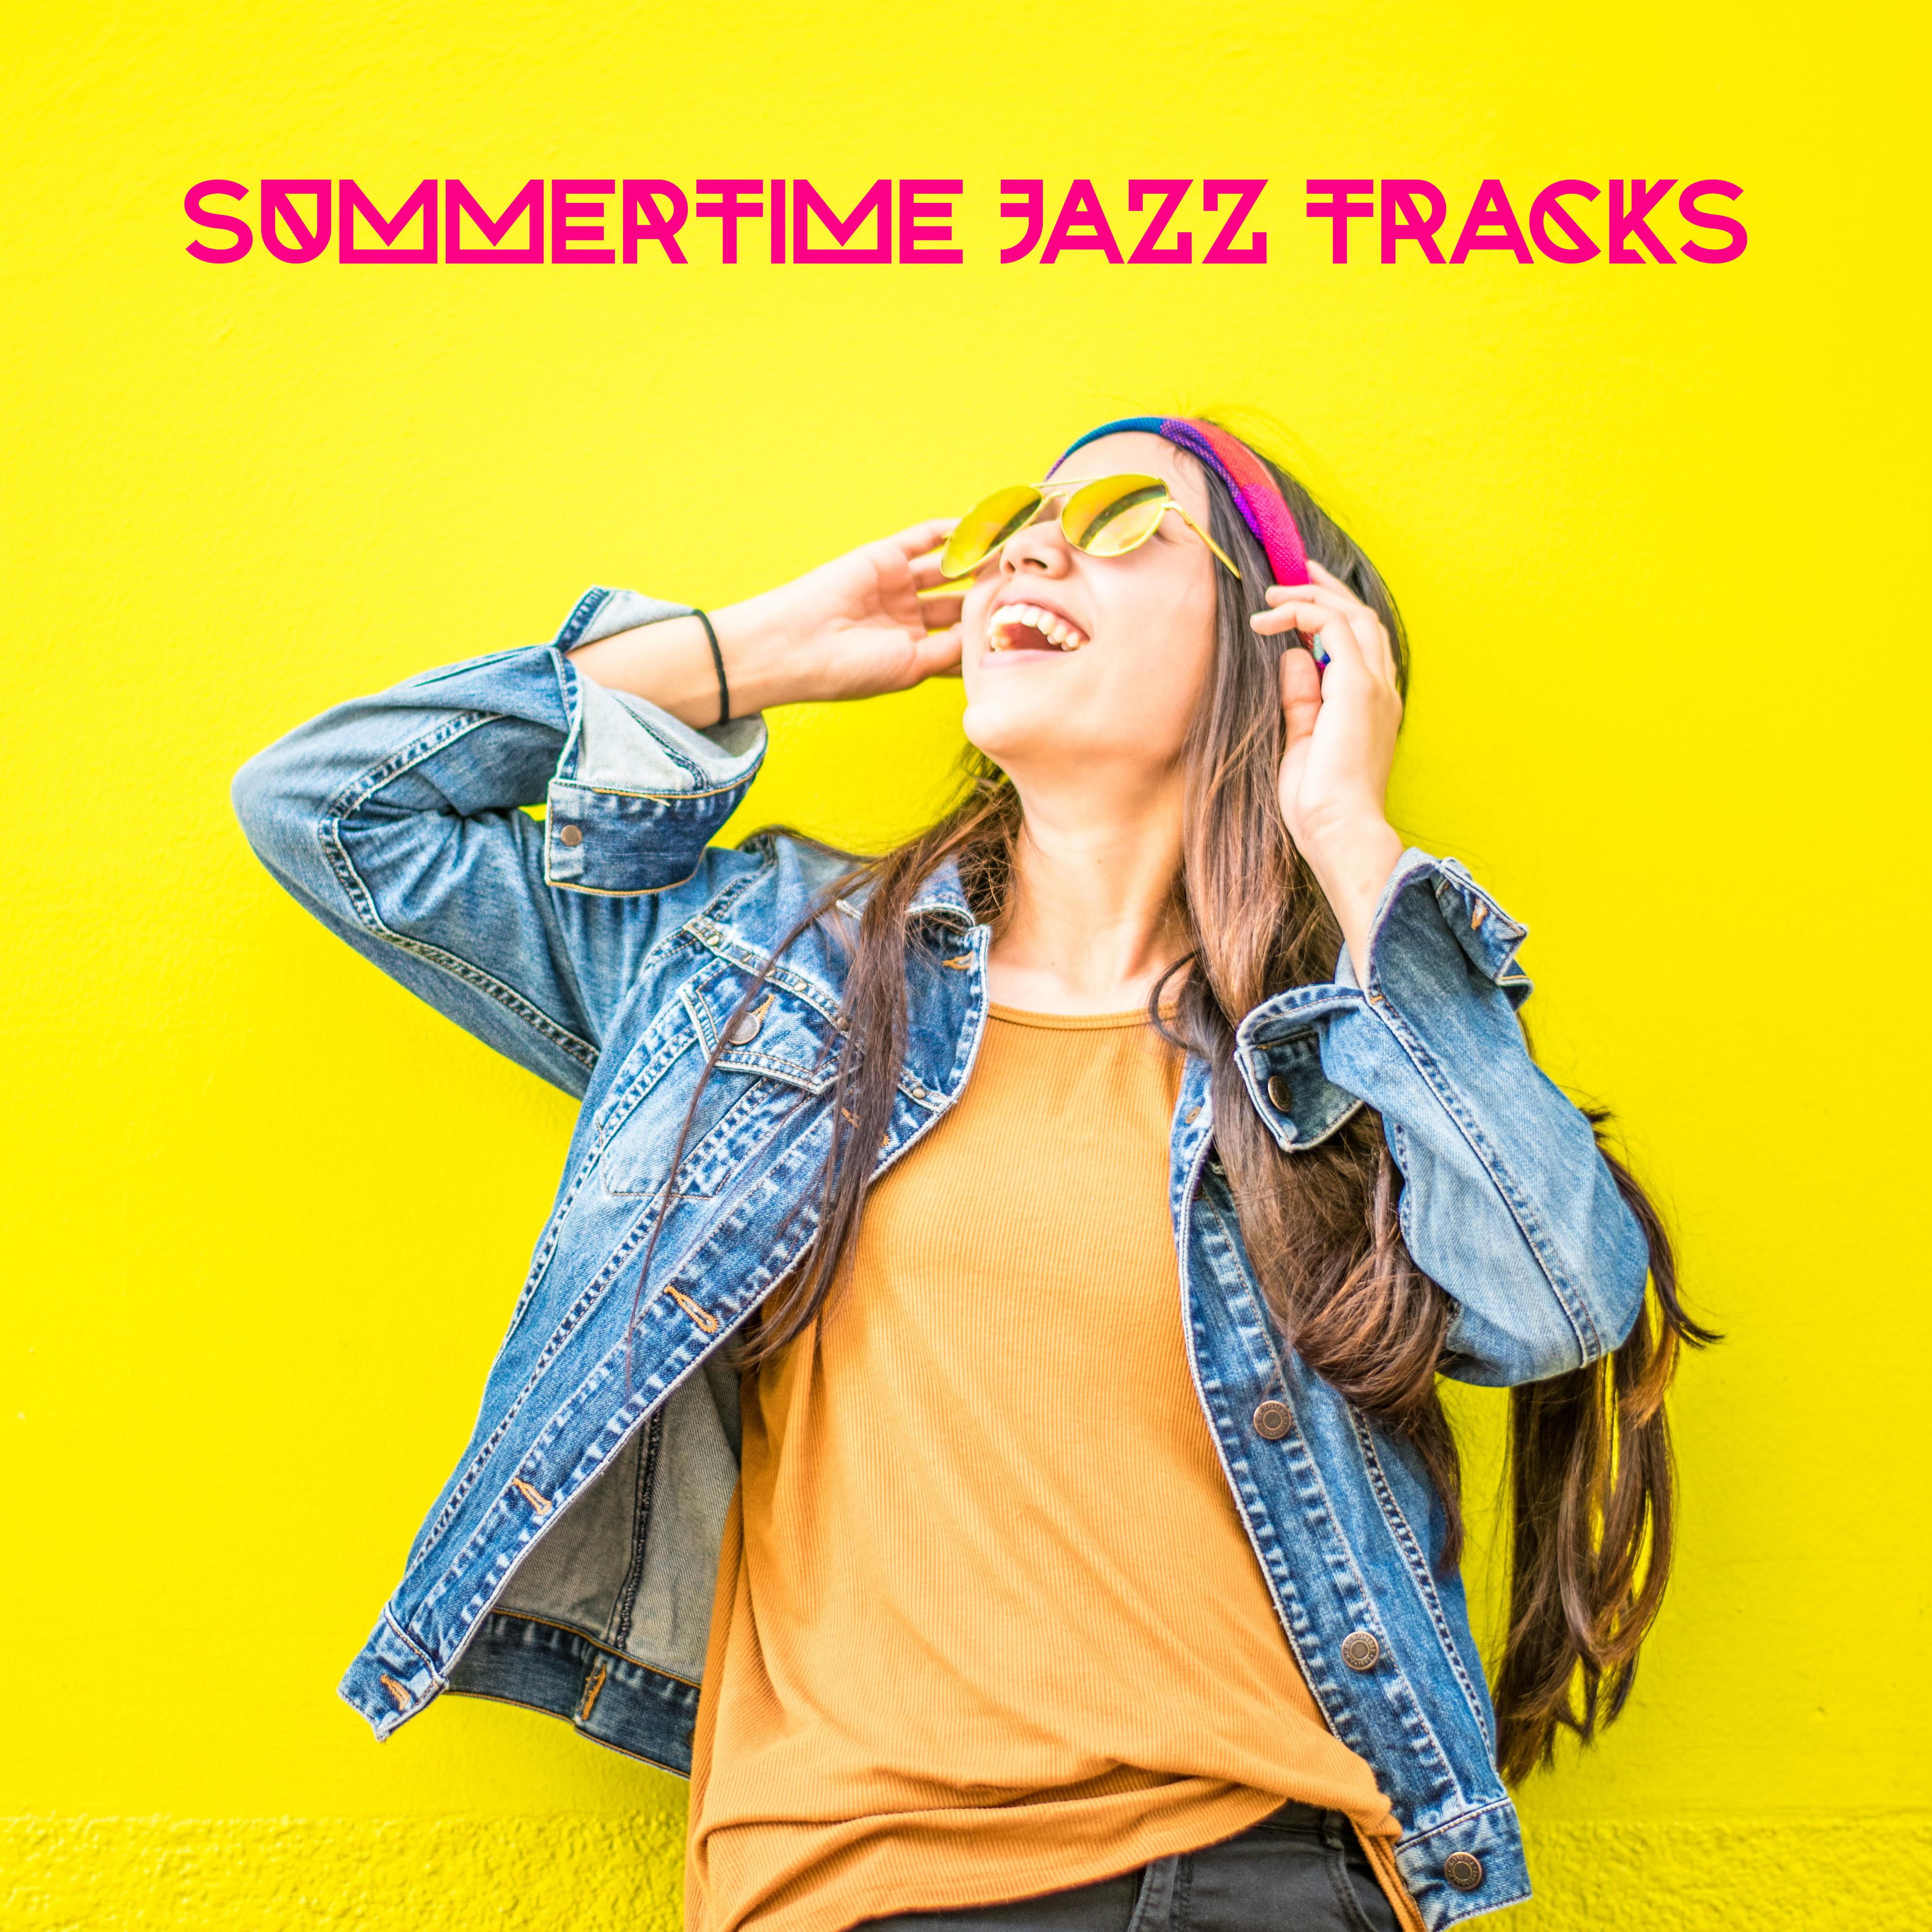 Summertime Jazz Tracks - Music for Holidays and Rest, a Relaxing Set for the Summer of 2019, Music for Lazing, Evening Relaxation and Listening at Home